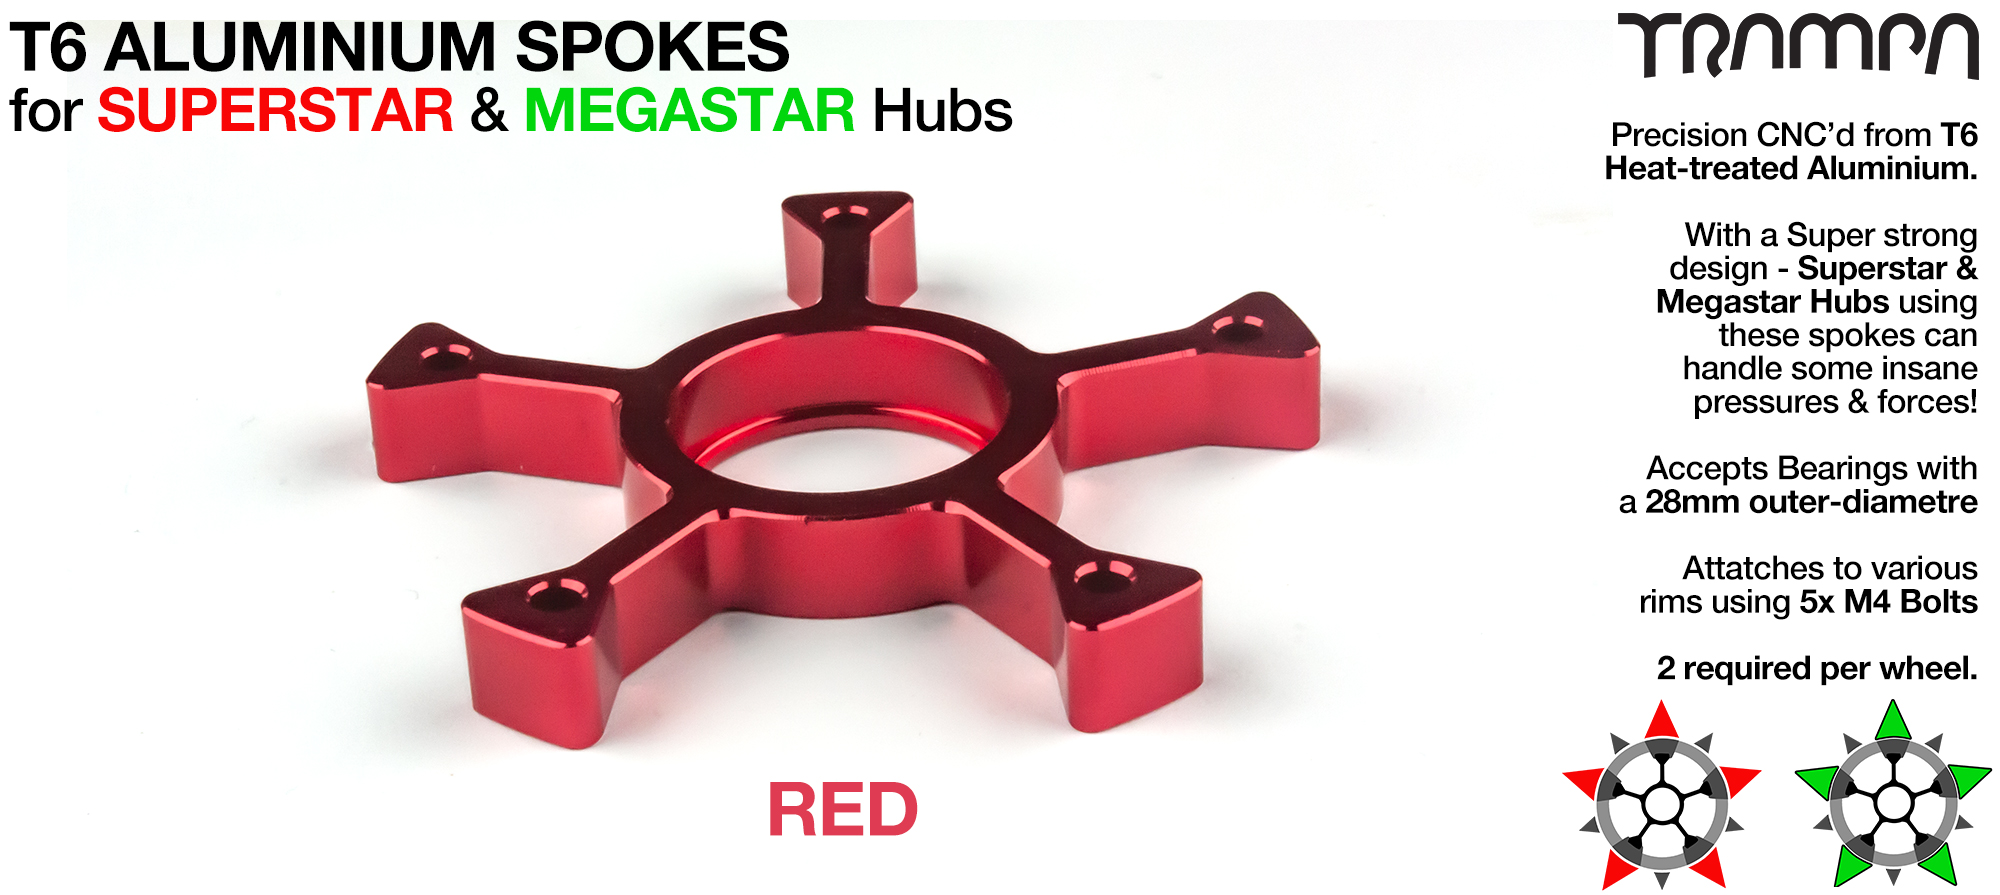 CLASSIC Spokes - RED 